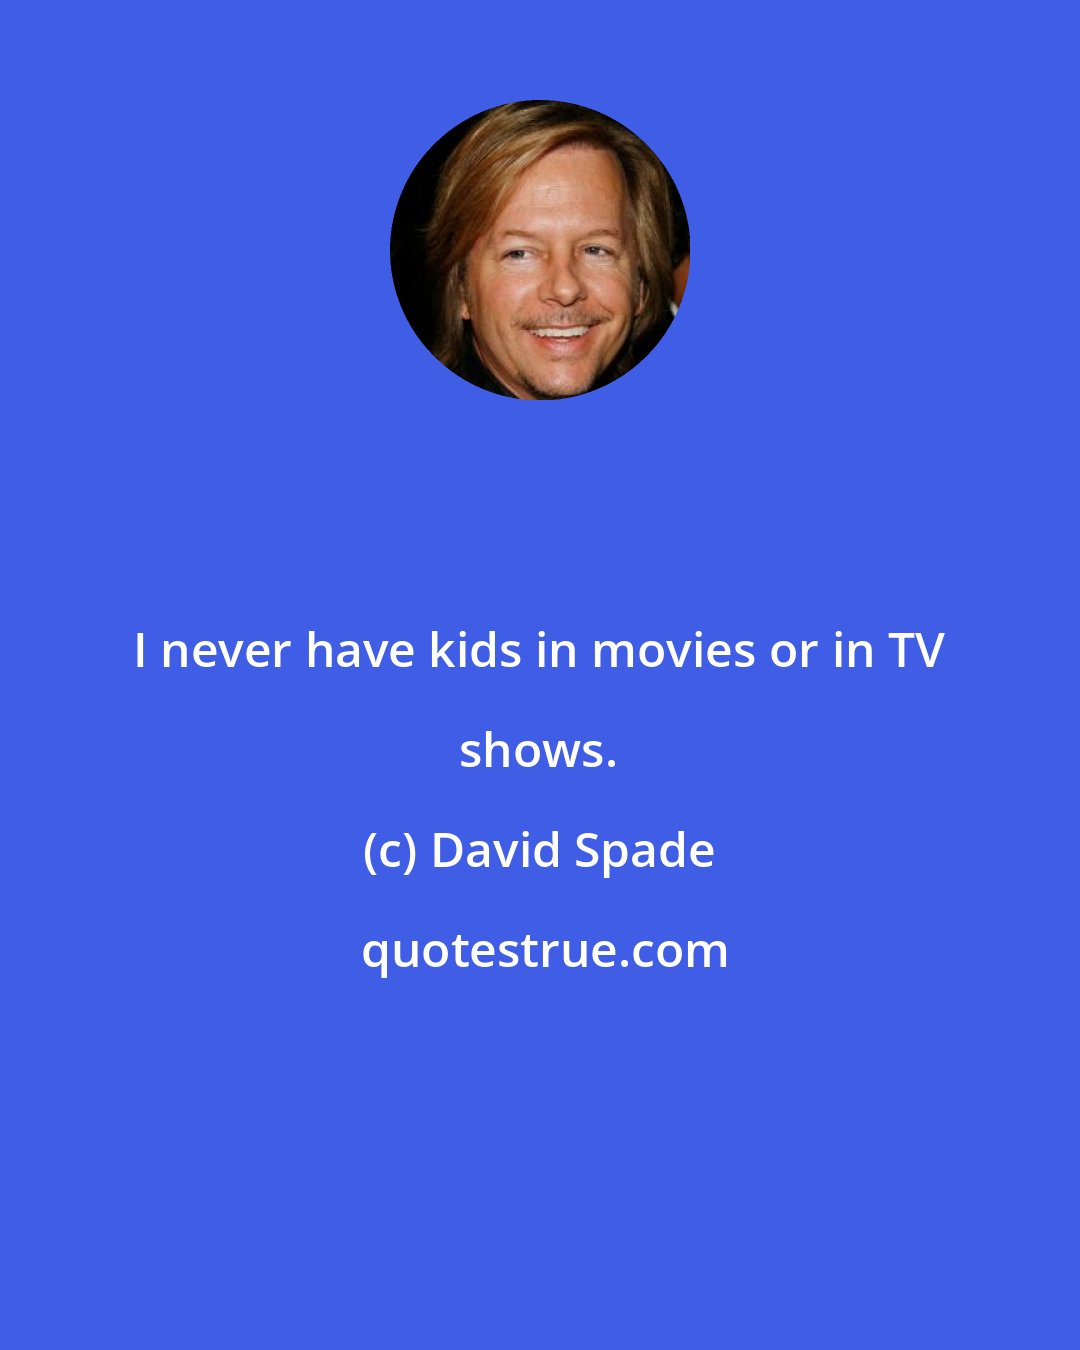 David Spade: I never have kids in movies or in TV shows.